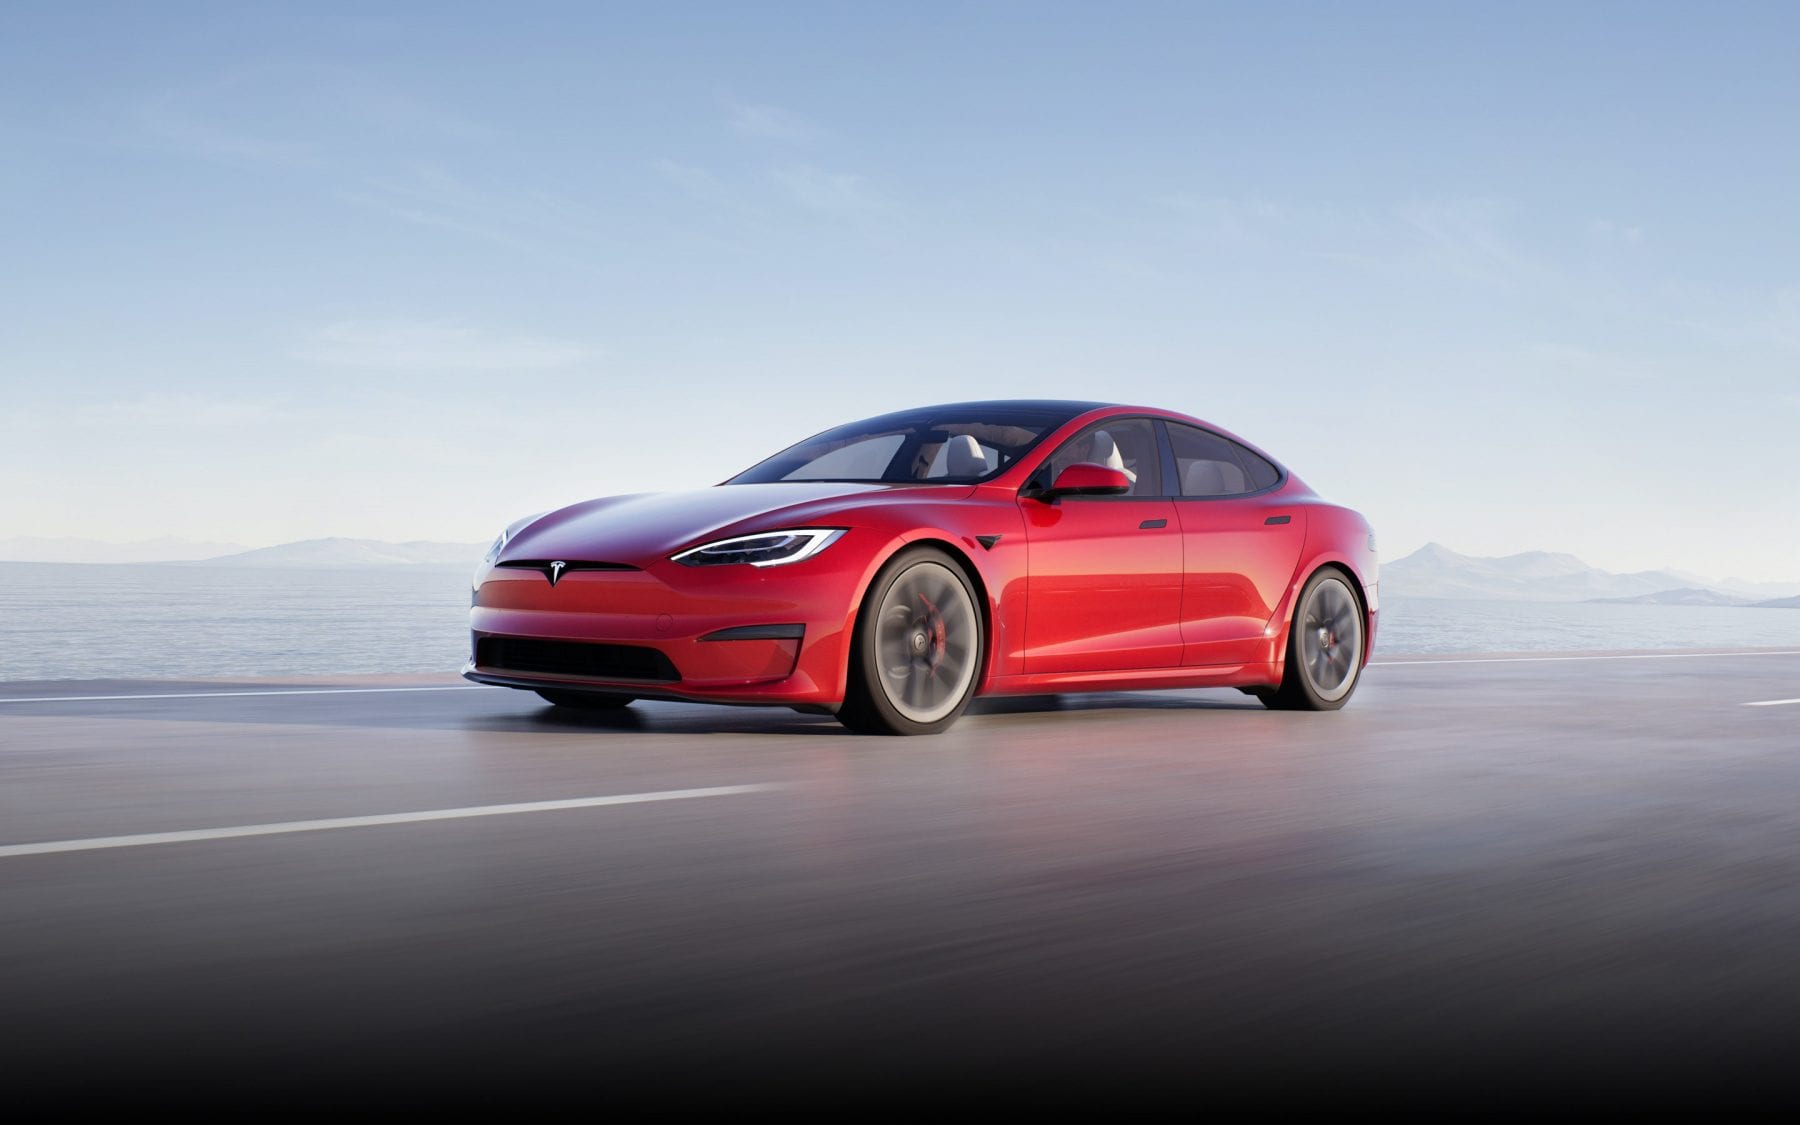 Tesla Model 3 Refresh - What's New and What's Changed